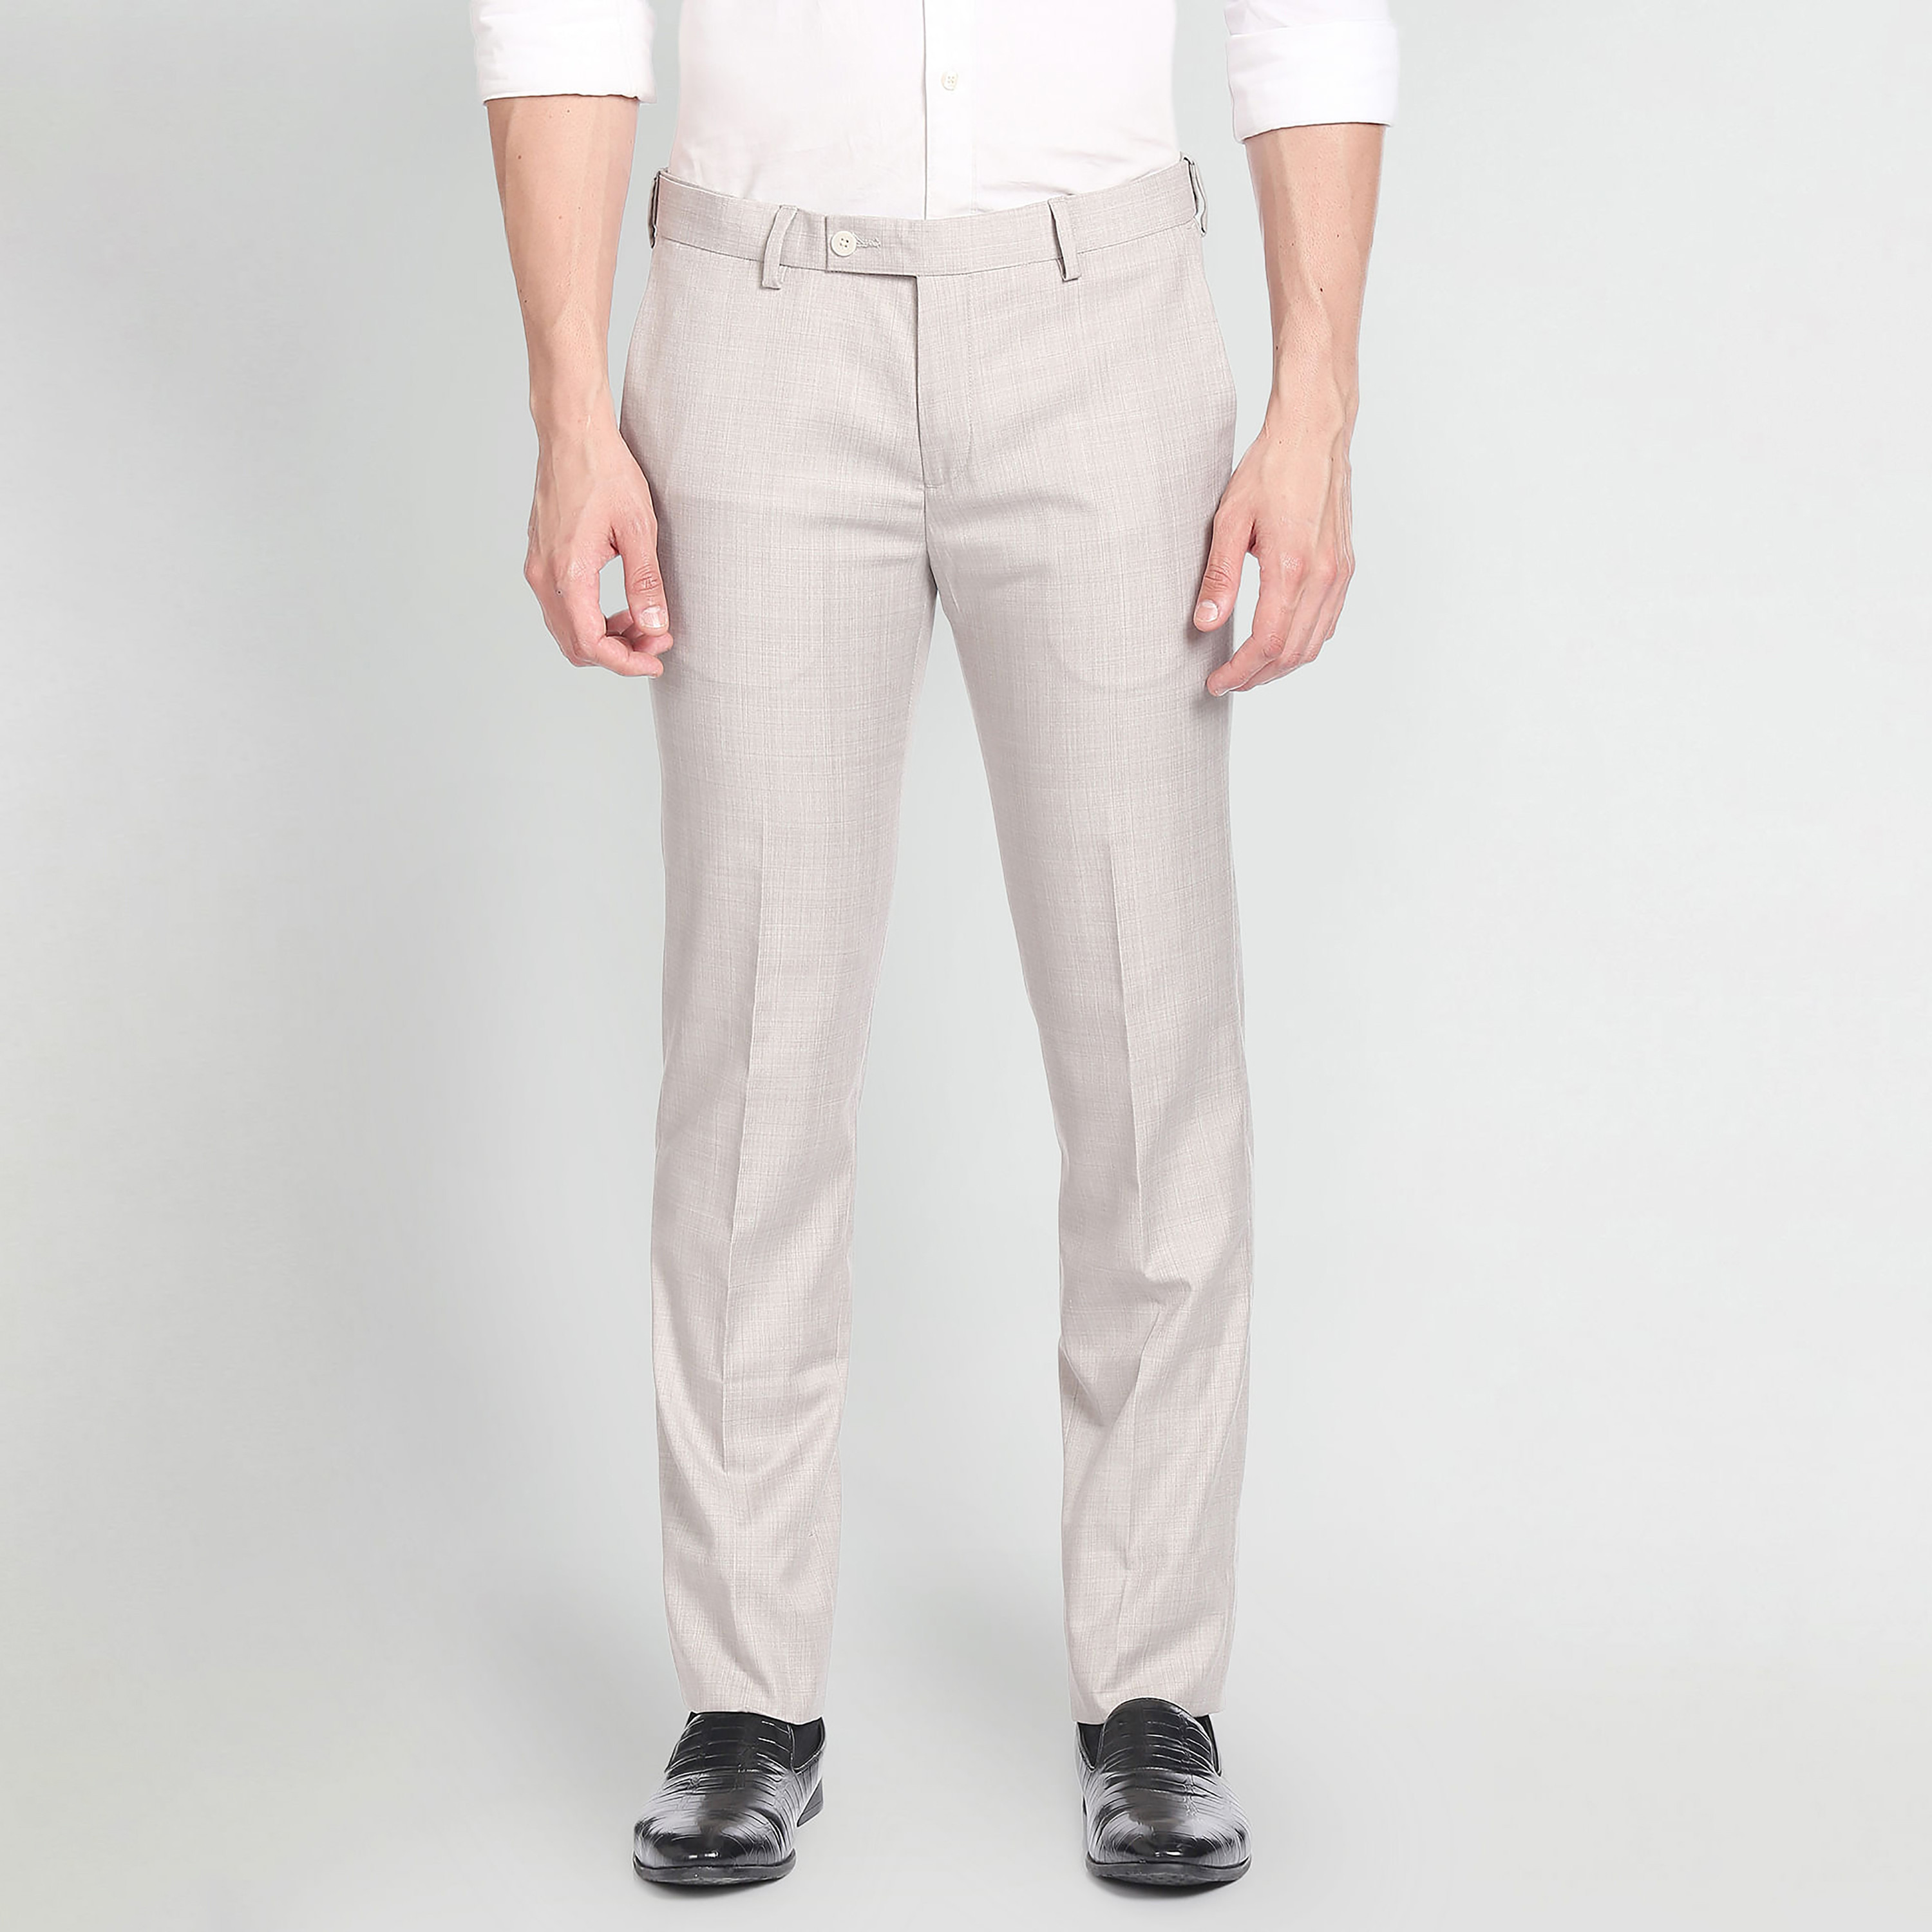 Buy Arrow Mid Rise Dobby Solid Formal Trousers - NNNOW.com